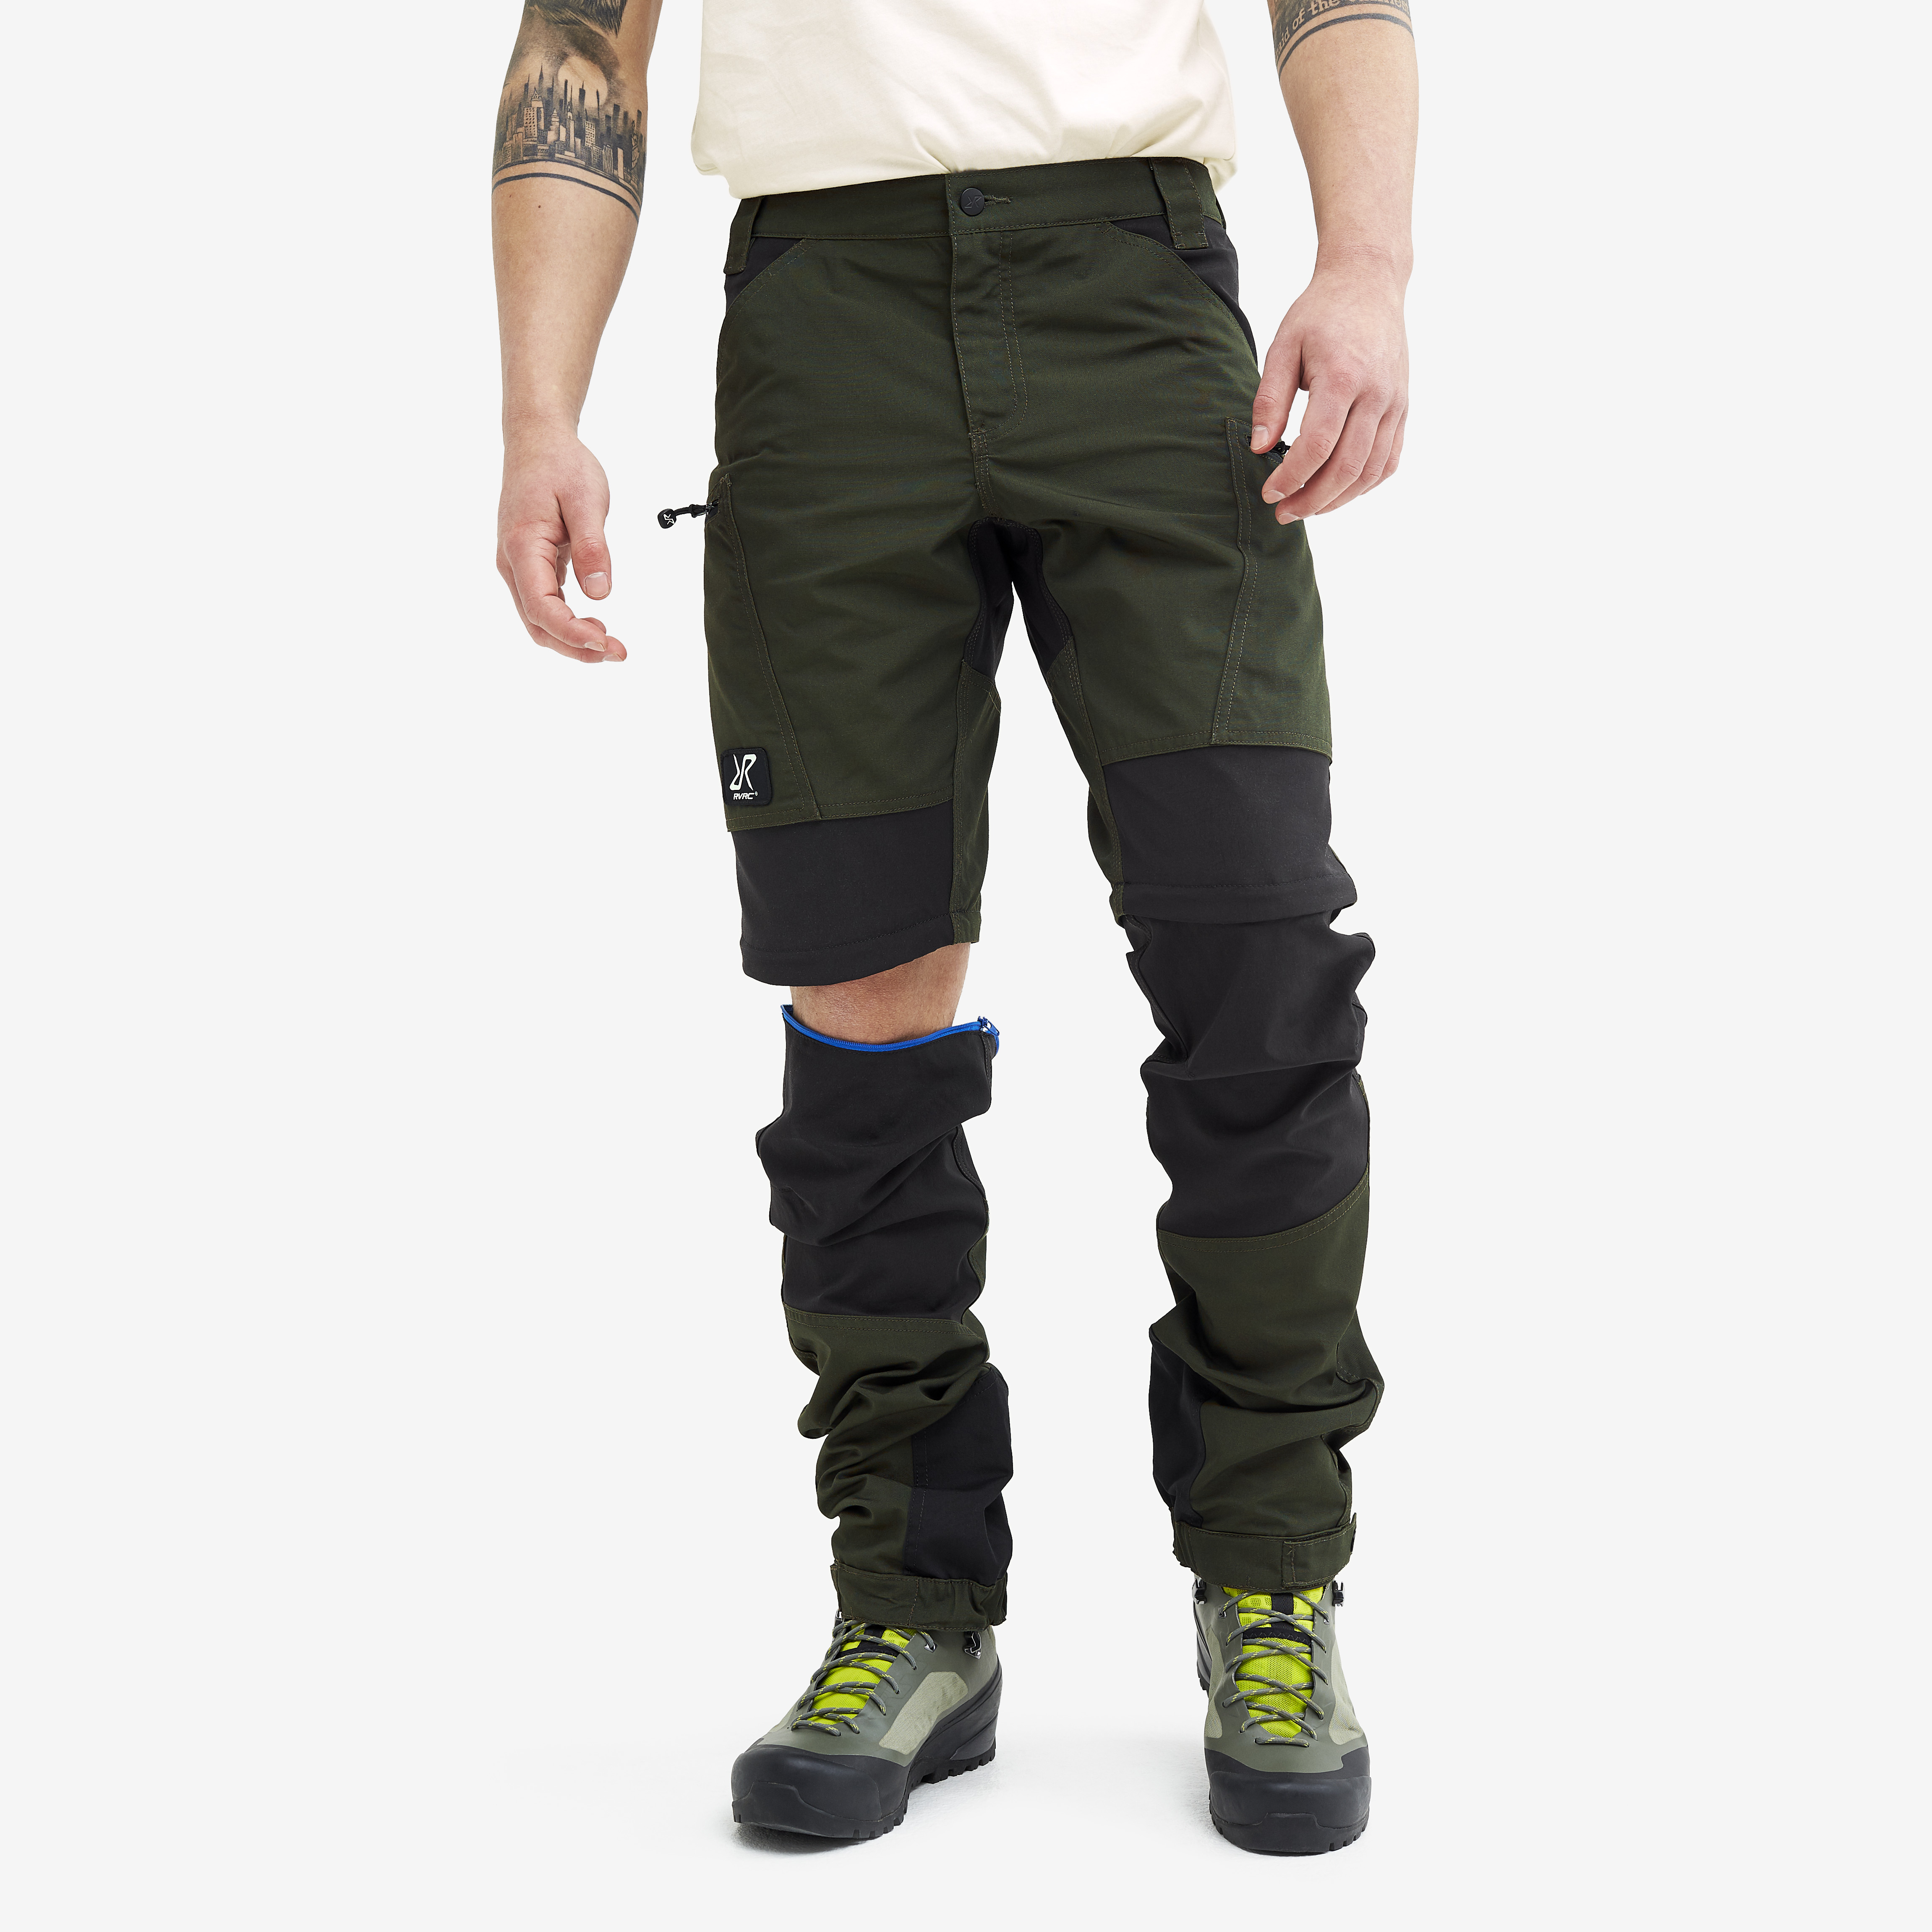 Nordwand Pro Zip-off hiking trousers for men in green